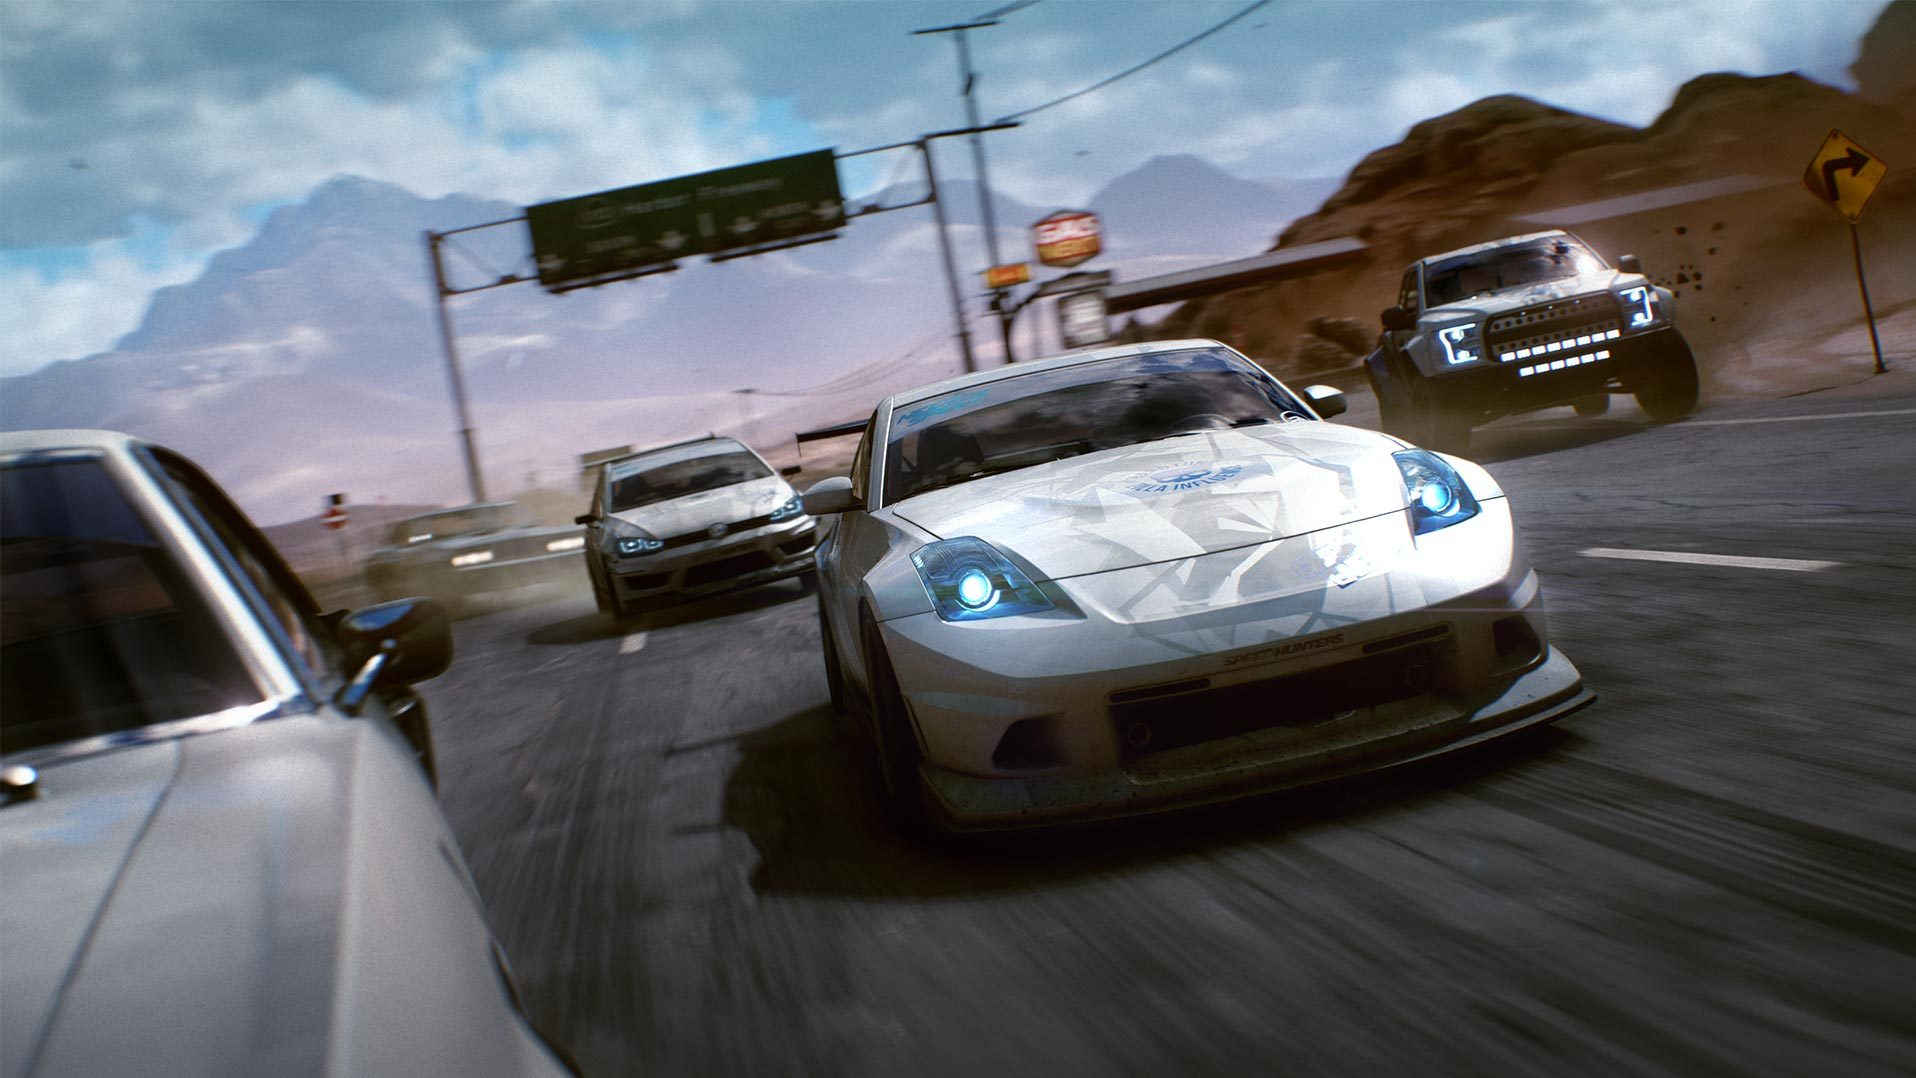 Media asset in full size related to 3dfxzone.it news item entitled as follows: Reveal trailer, screenshots e data di lancio del game Need for Speed Payback | Image Name: news26452_Need-for-Speed-Payback_1.jpg